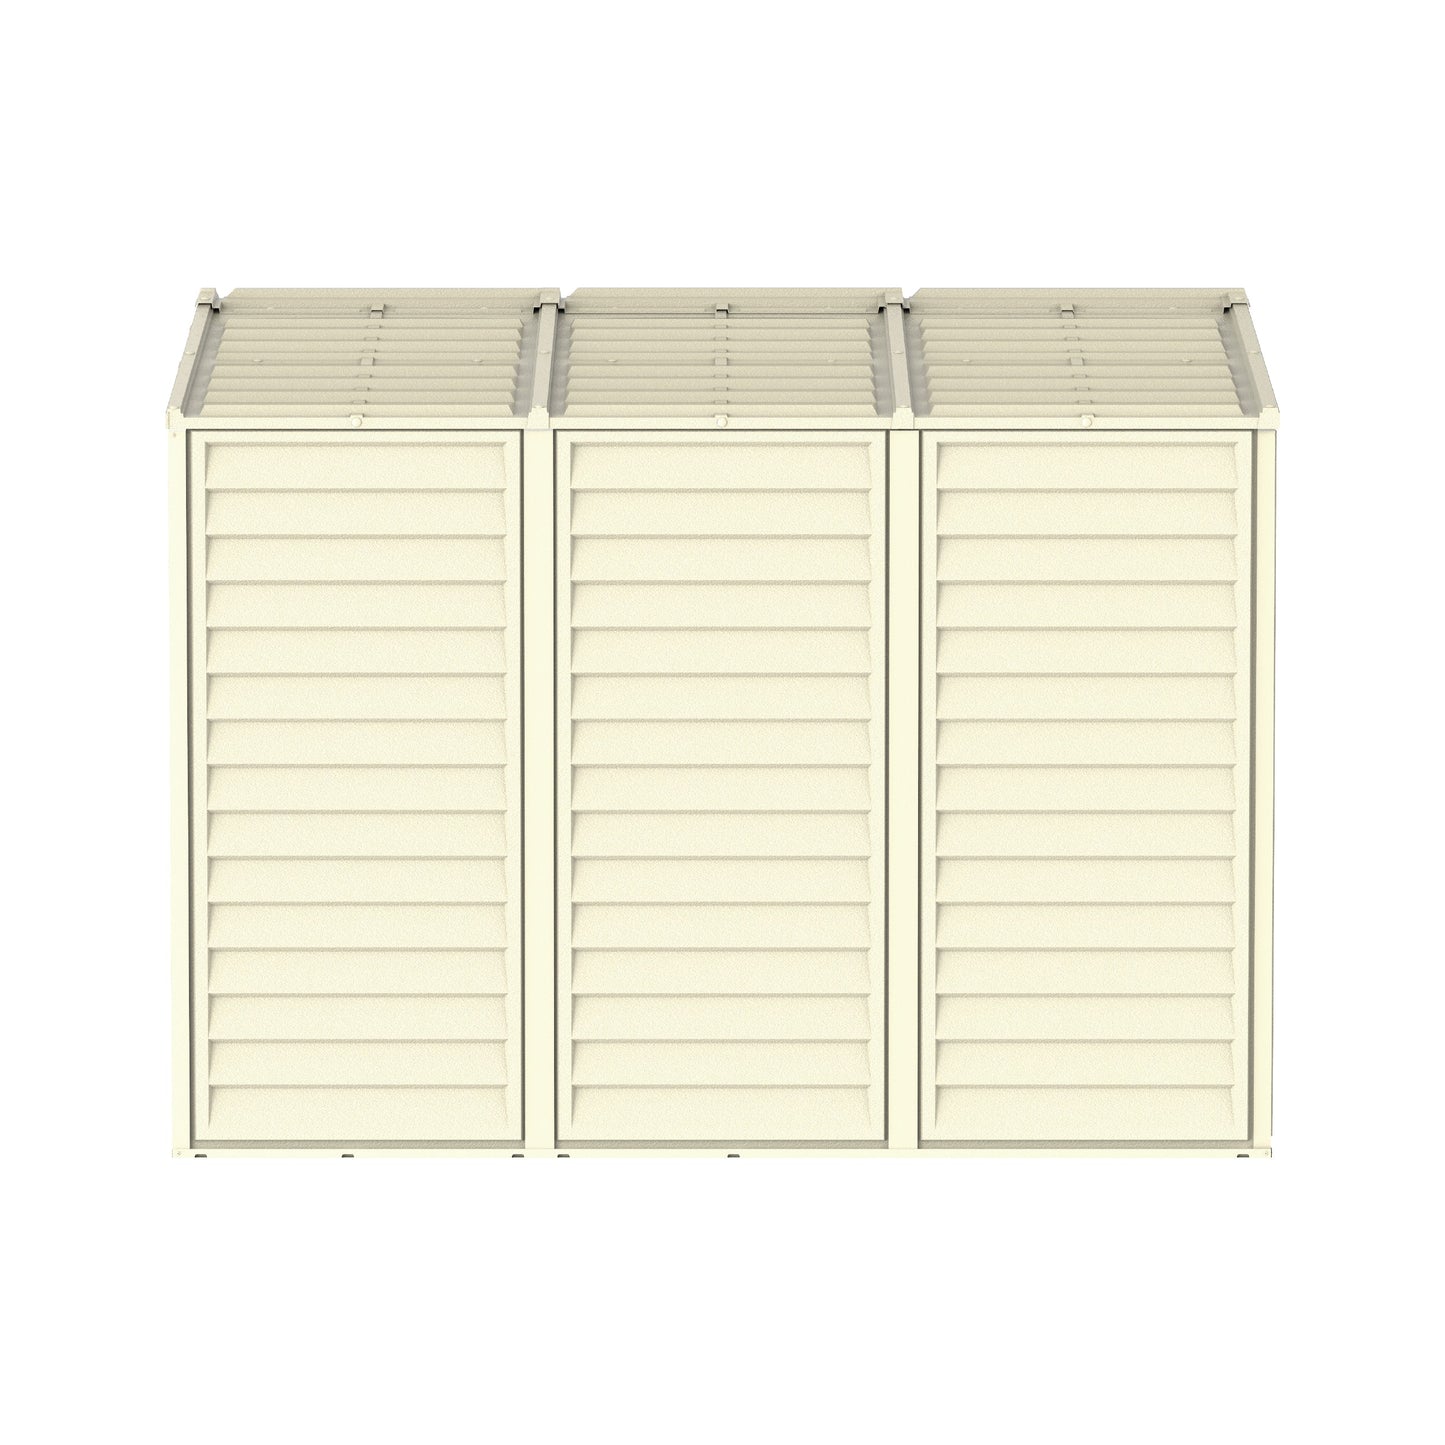 DuraMate 8x8ft (239.7 x241.8x187.5 cm) Resin Storage Shed